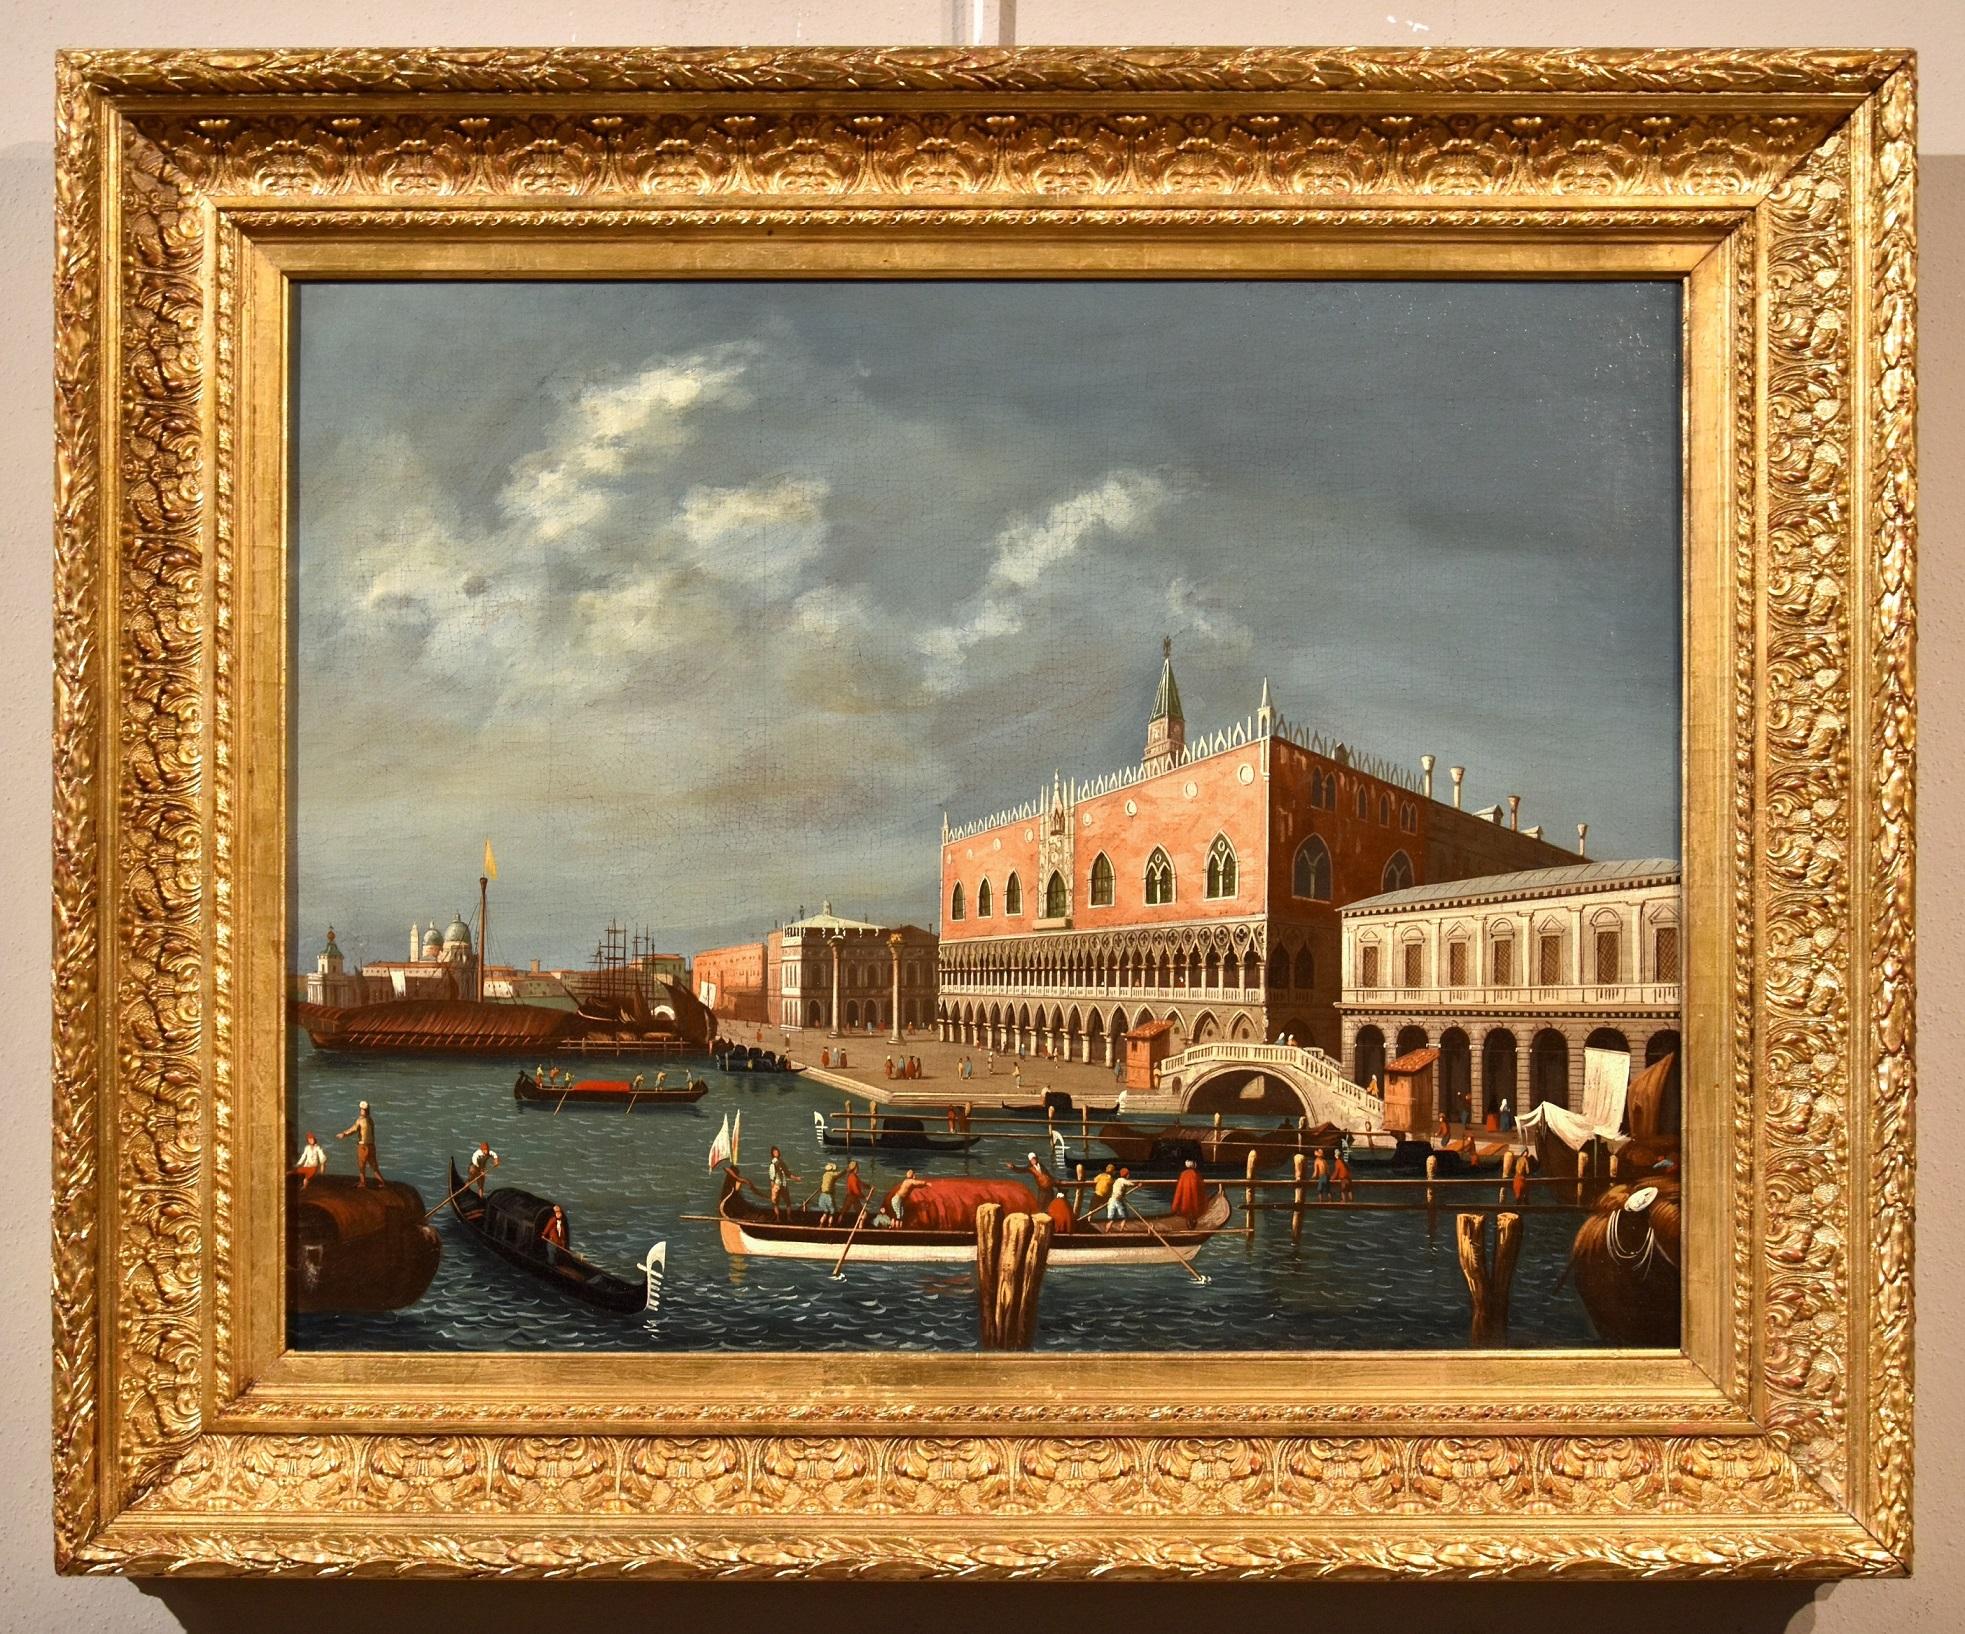 View Venice Bella Paint Oil on canvas Old master 18/19th Century Landscape - Painting by Gabriele Bella (Venice 1730 - Venice 1799)